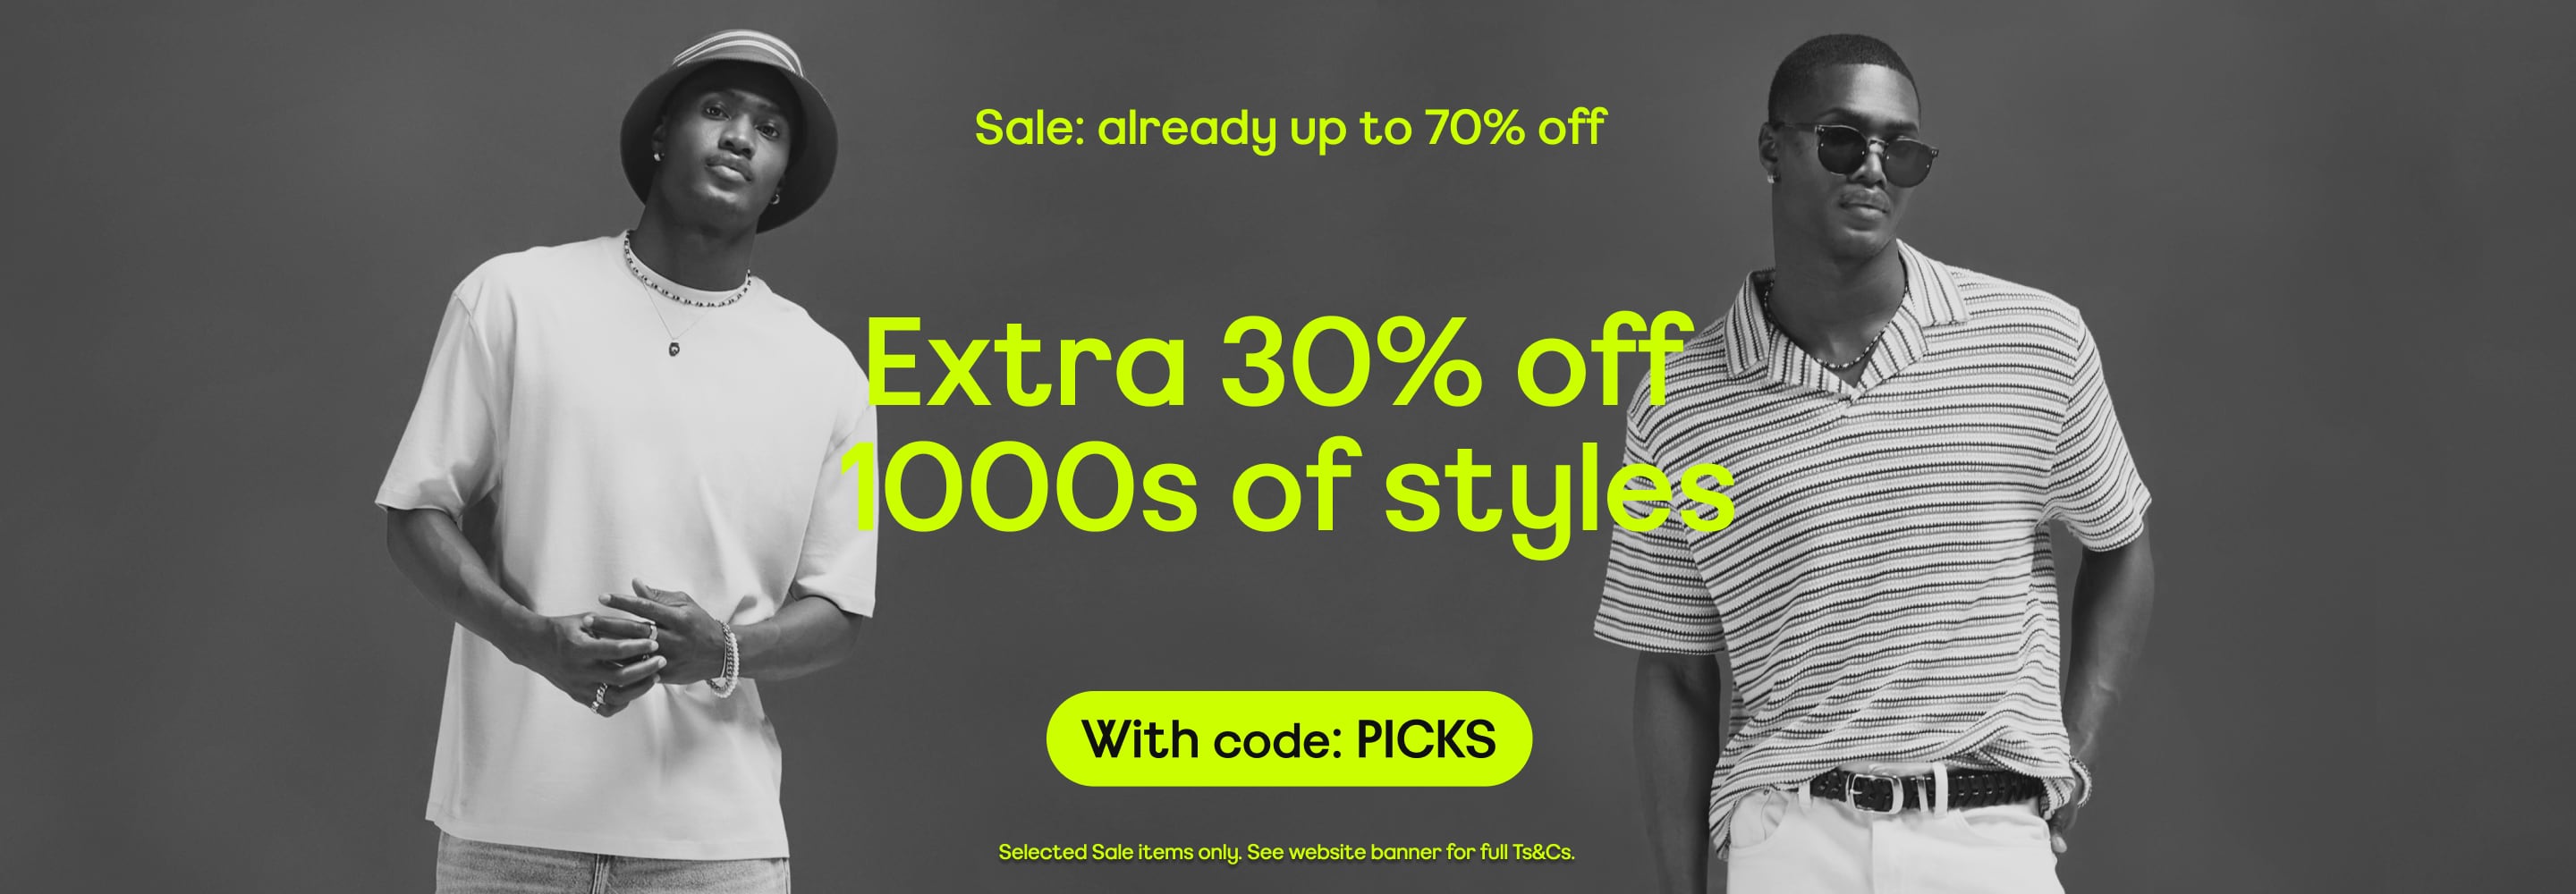 Sale: already up to 70% off Extra 30% off 1000s of styles With code: PICKS Selected Sale items only. See website banner for full Ts&Cs.